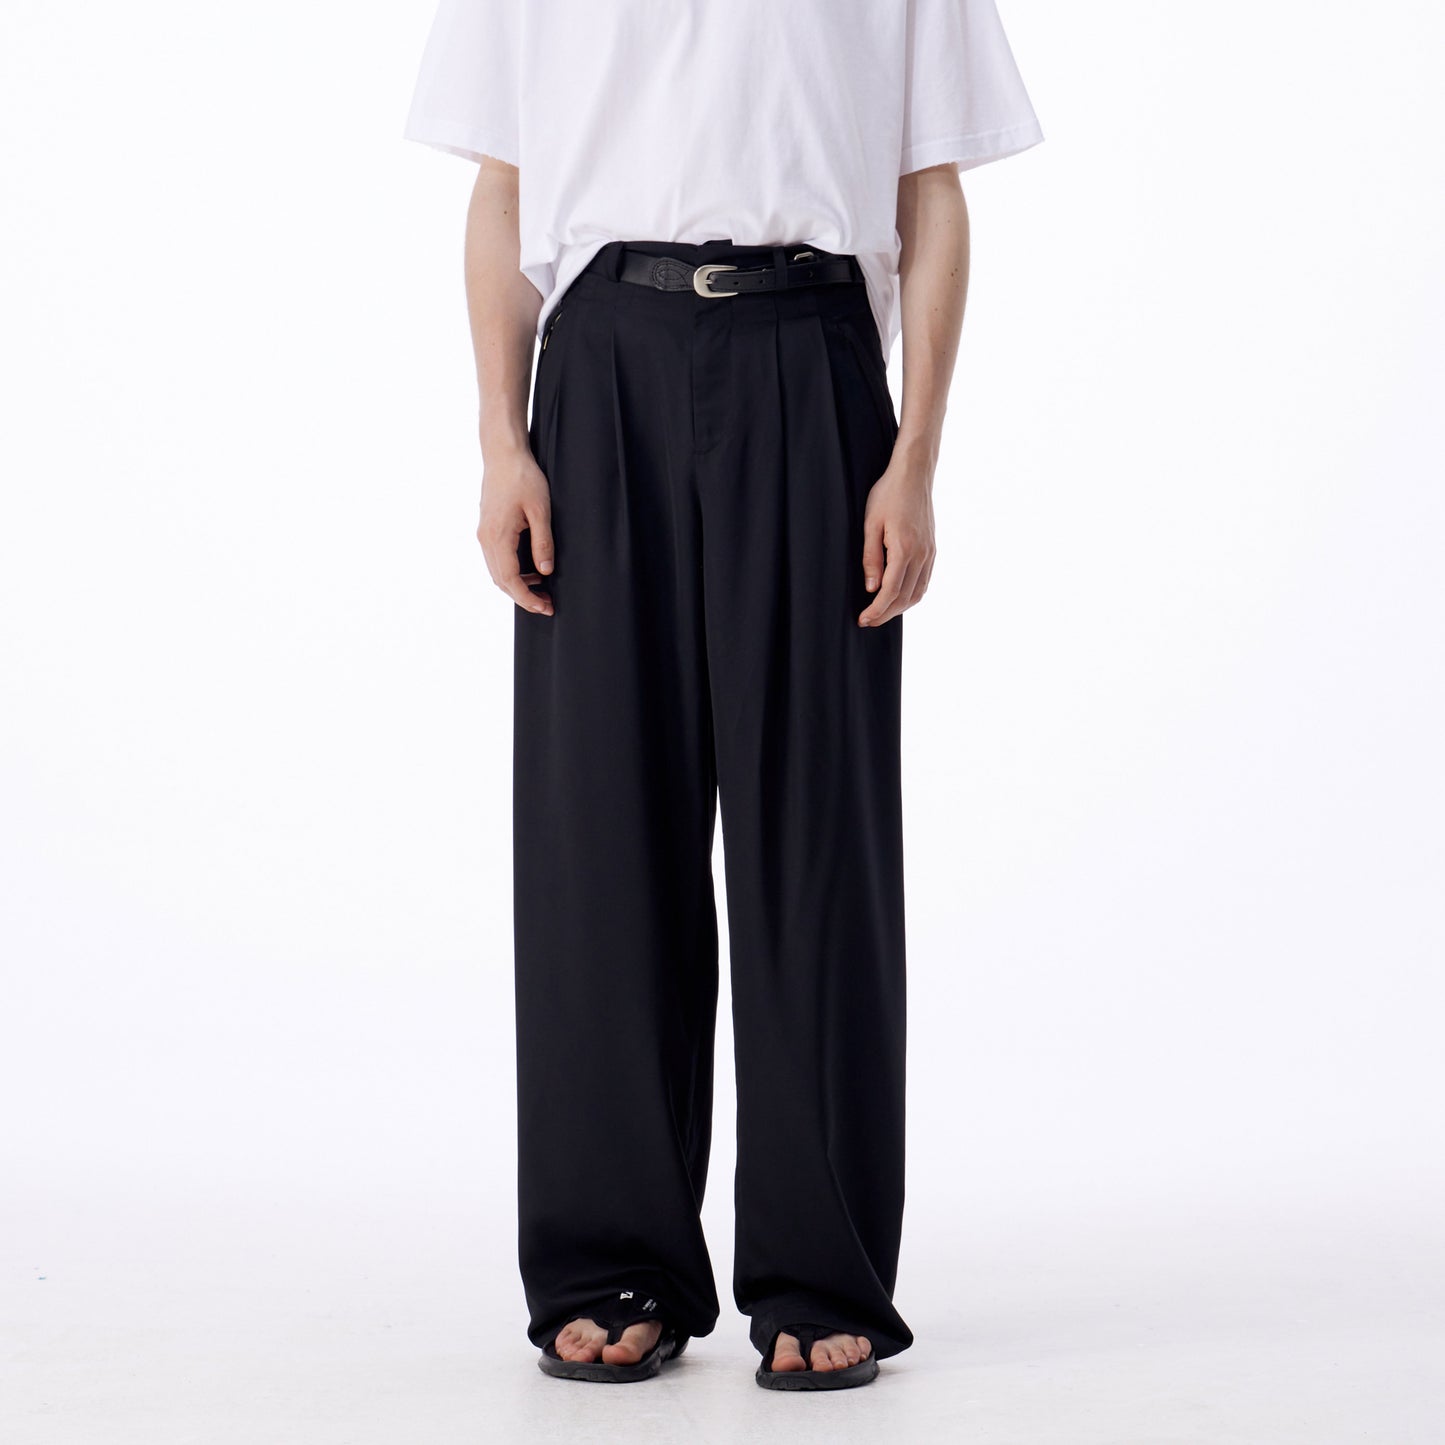 NUTH ‘Daily Needs’ Unisex Loose Trousers